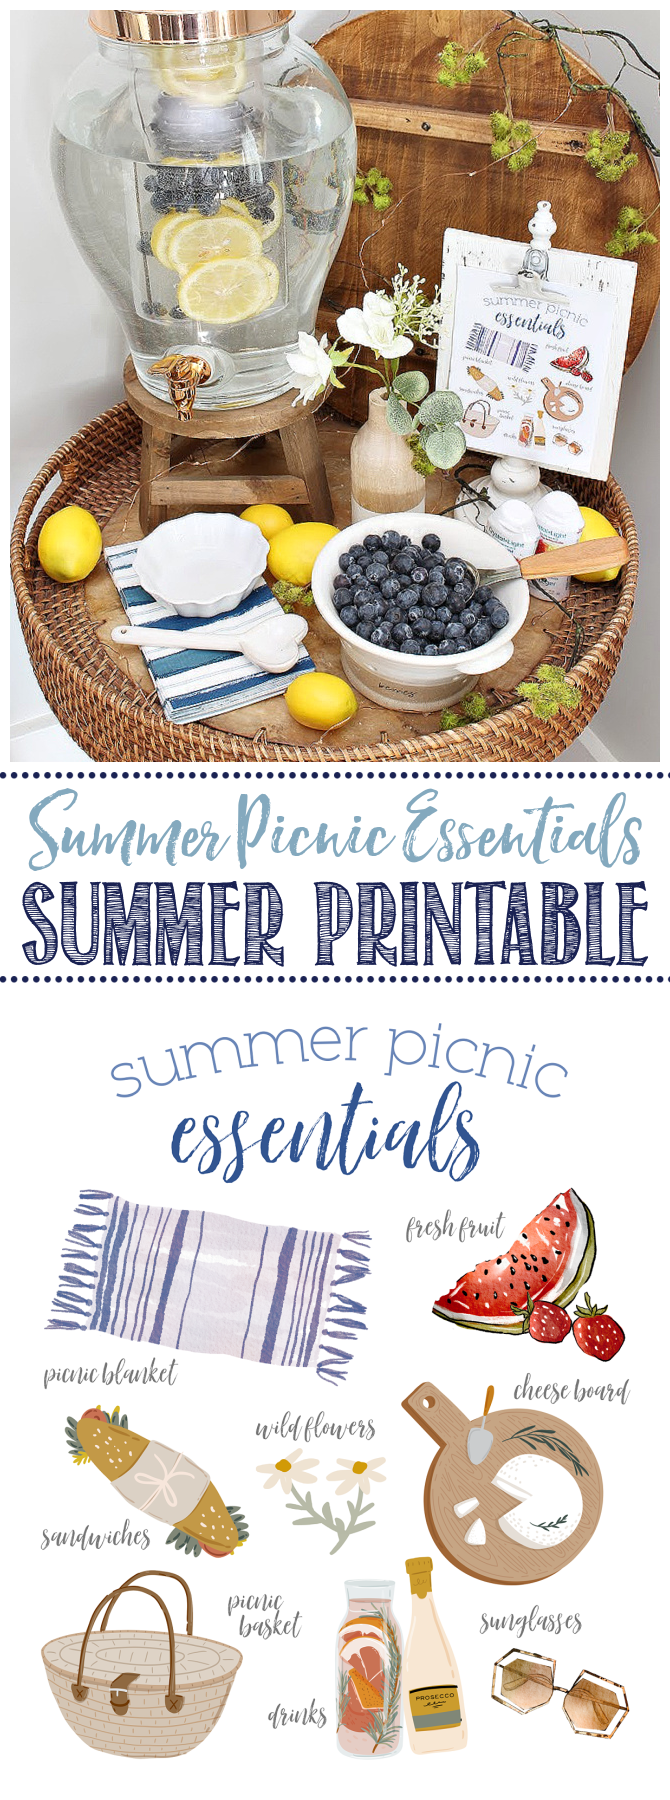 Summer Picnic Essentials free summer printable on a clipboard frame.